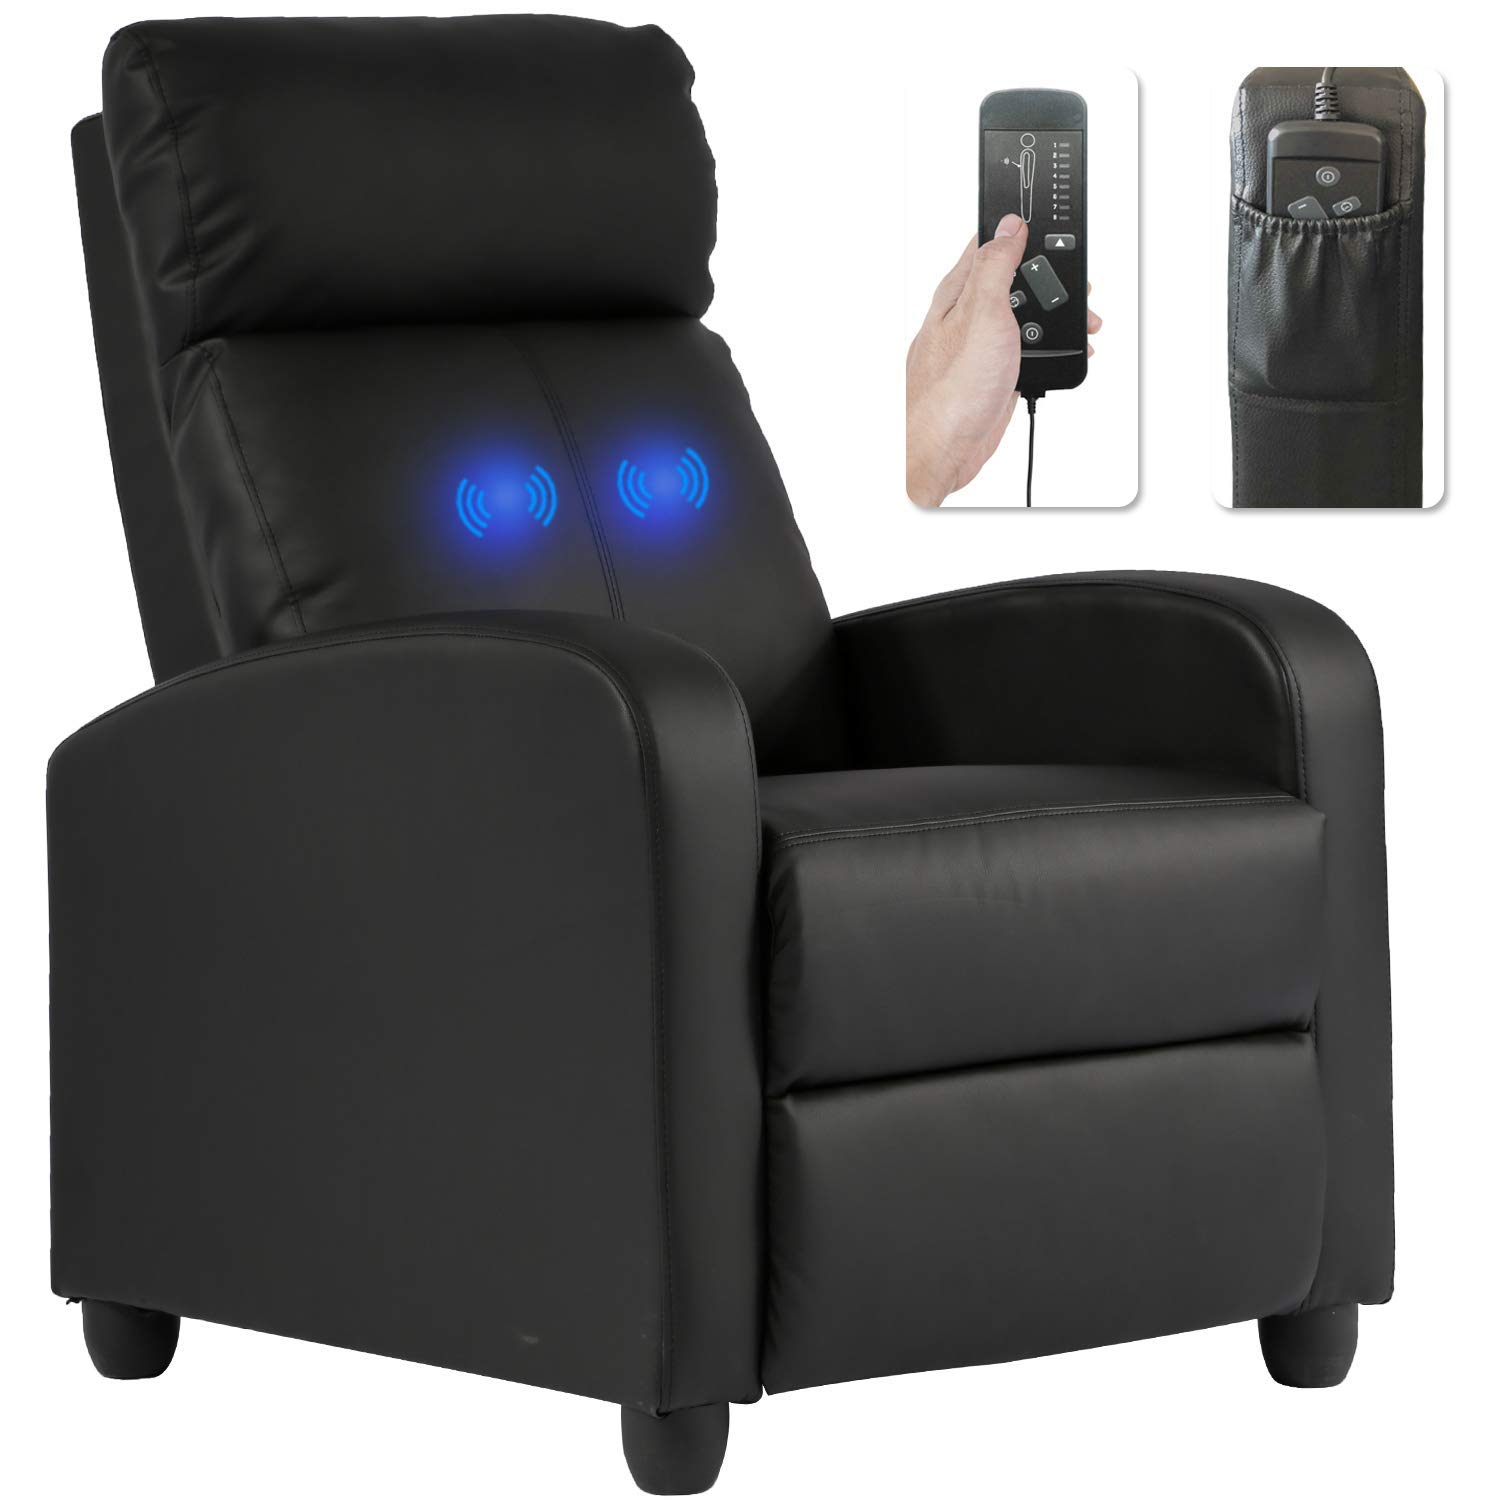 BestMassage Recliner chair for Living Room Massage Recliner Sofa Reading chair Winback Single Sofa Home Theater Seating Modern Reclining cha